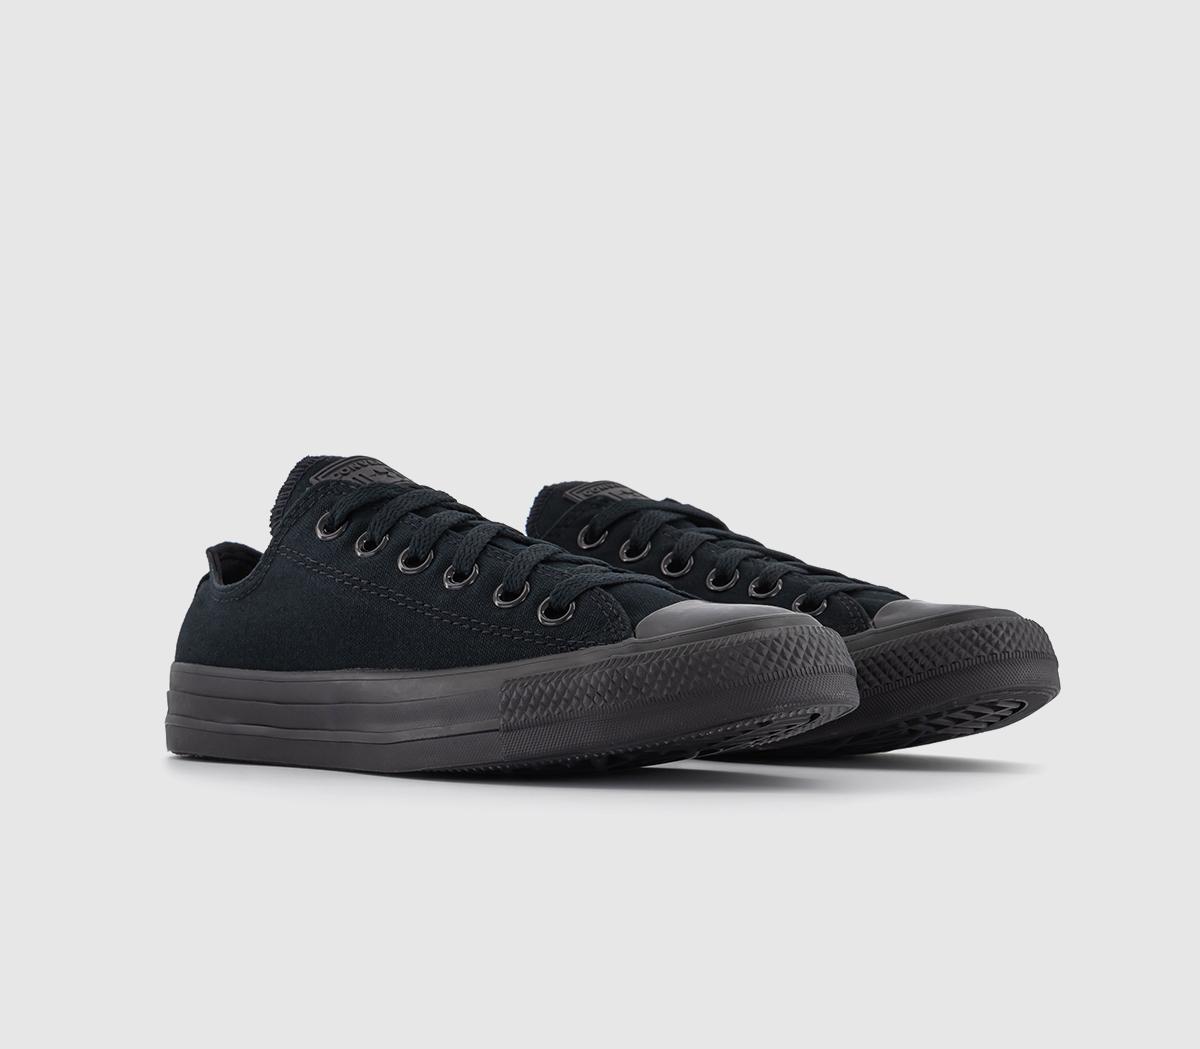 Converse Black All Star Low Monochrome Canvas Trainers, 9